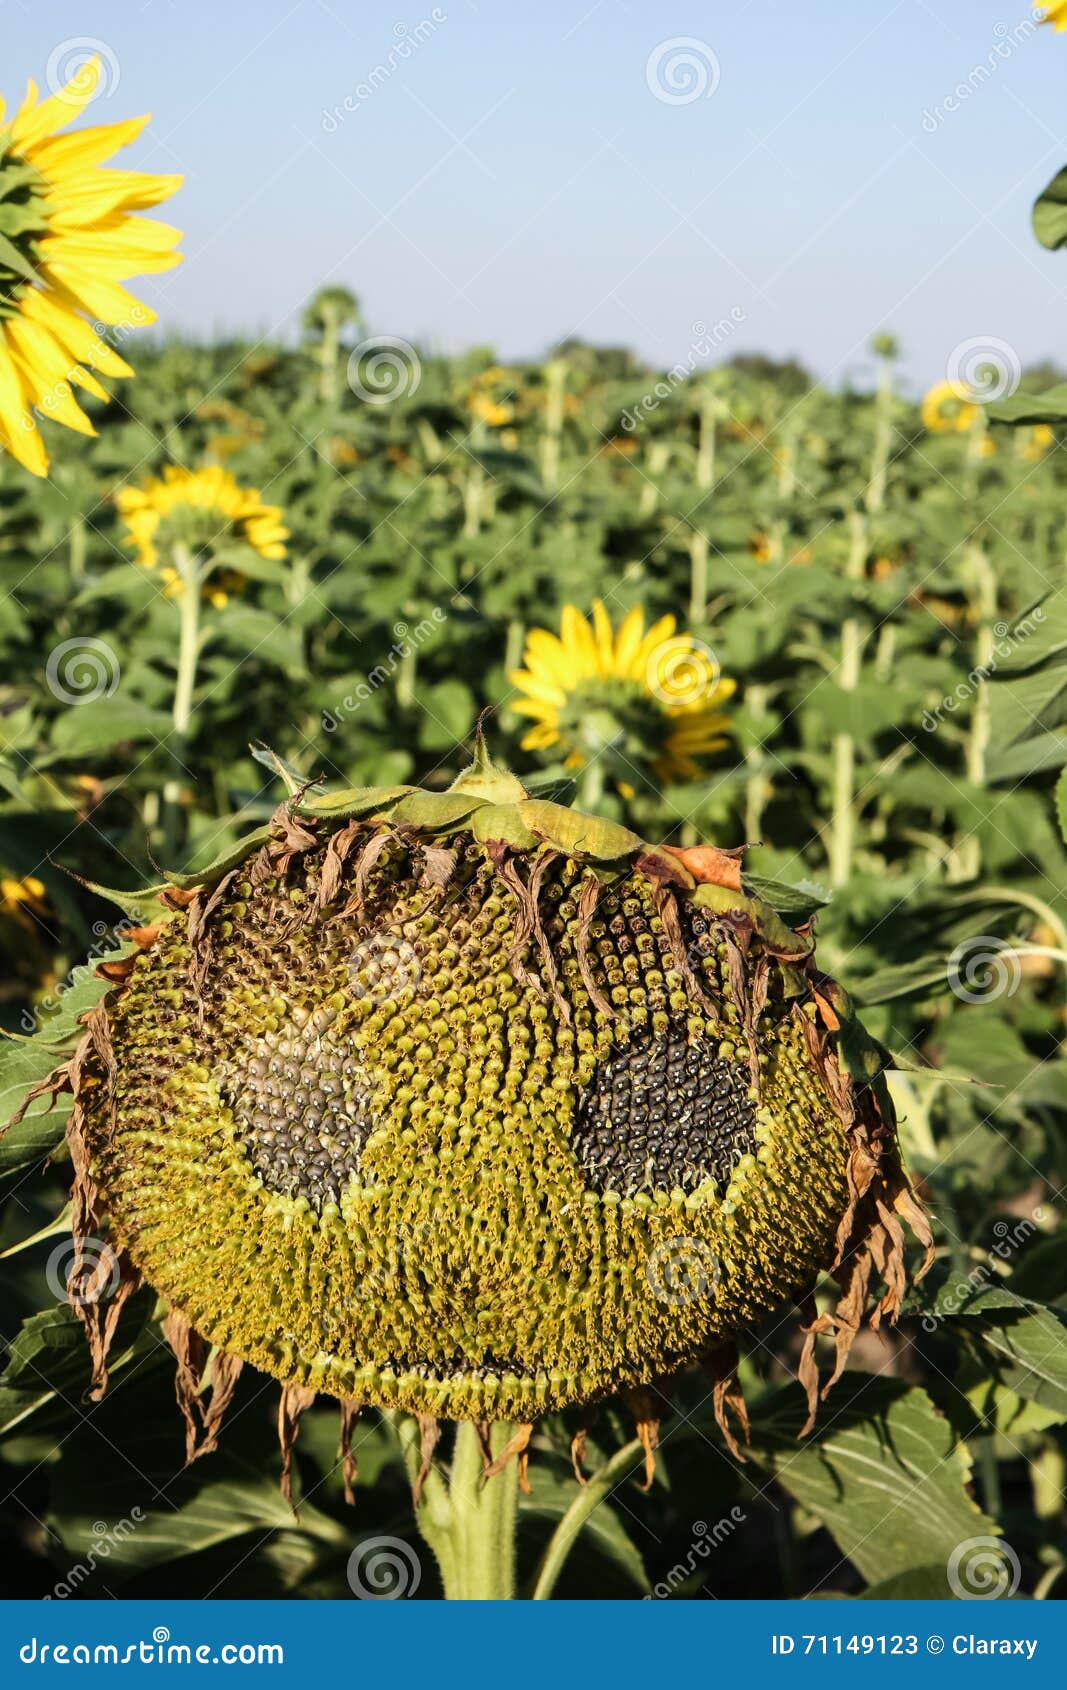 Creepy sunflower face stock image. Image of smiley, spooky - 71149123